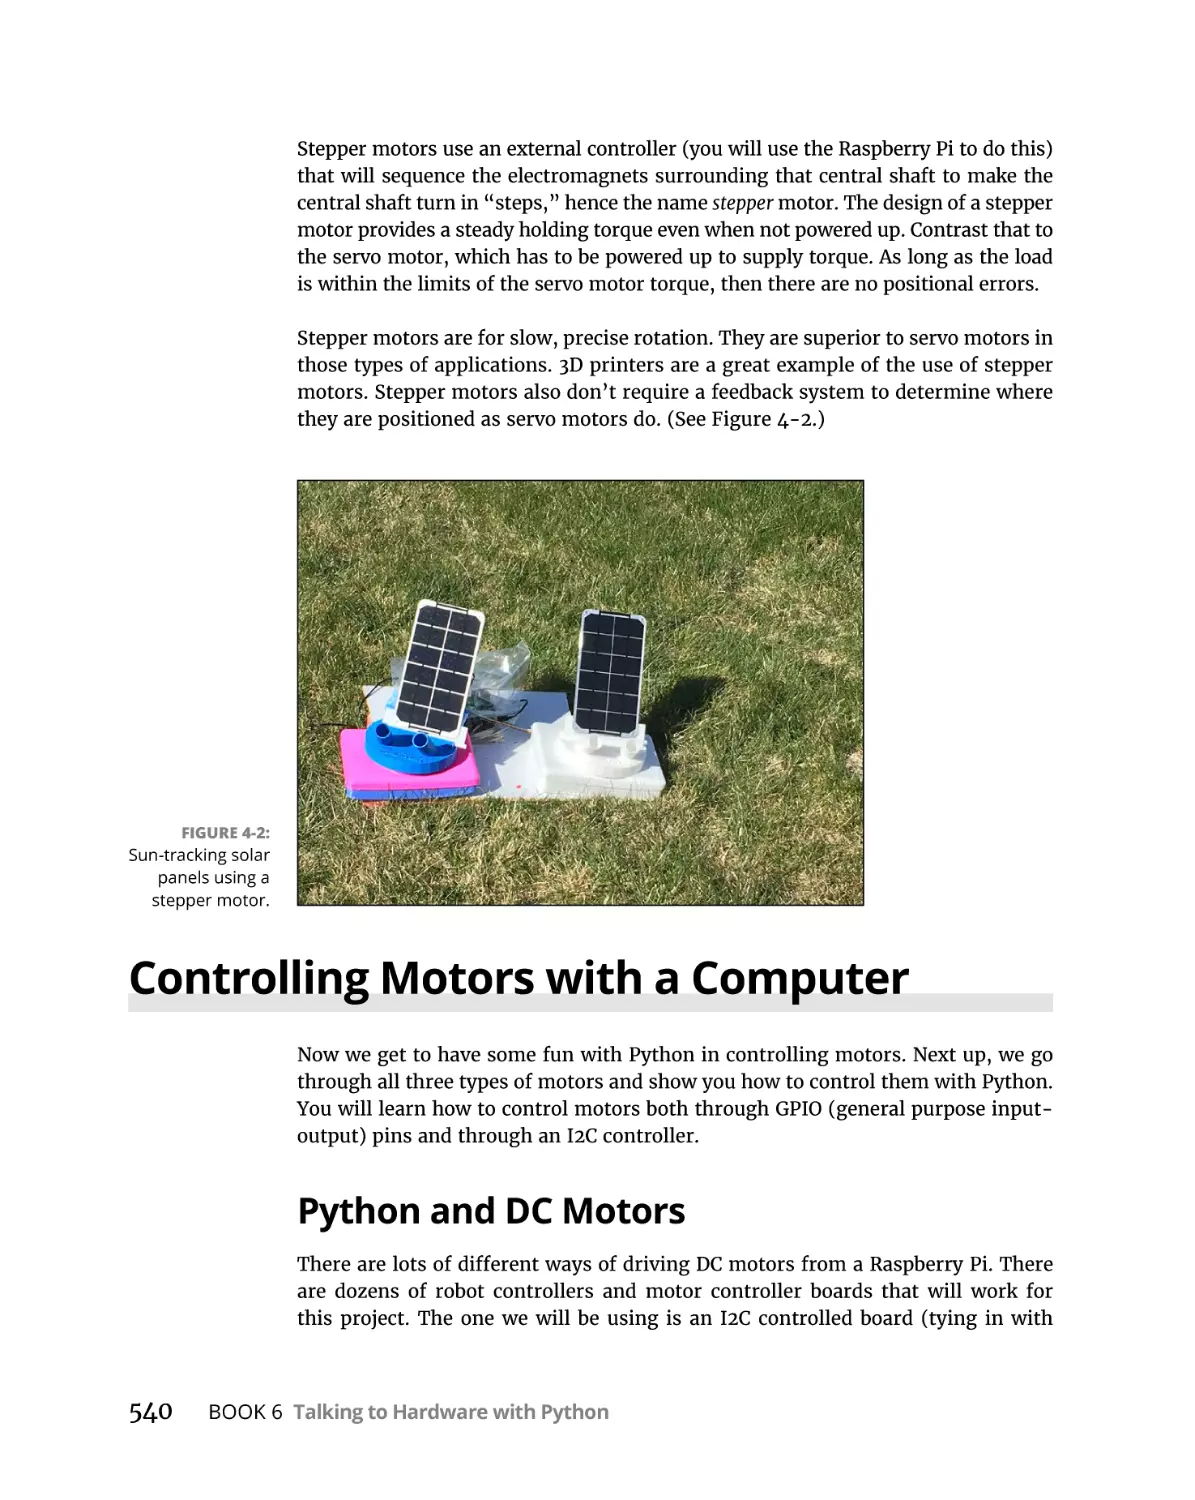 Controlling Motors with a Computer
Python and DC Motors